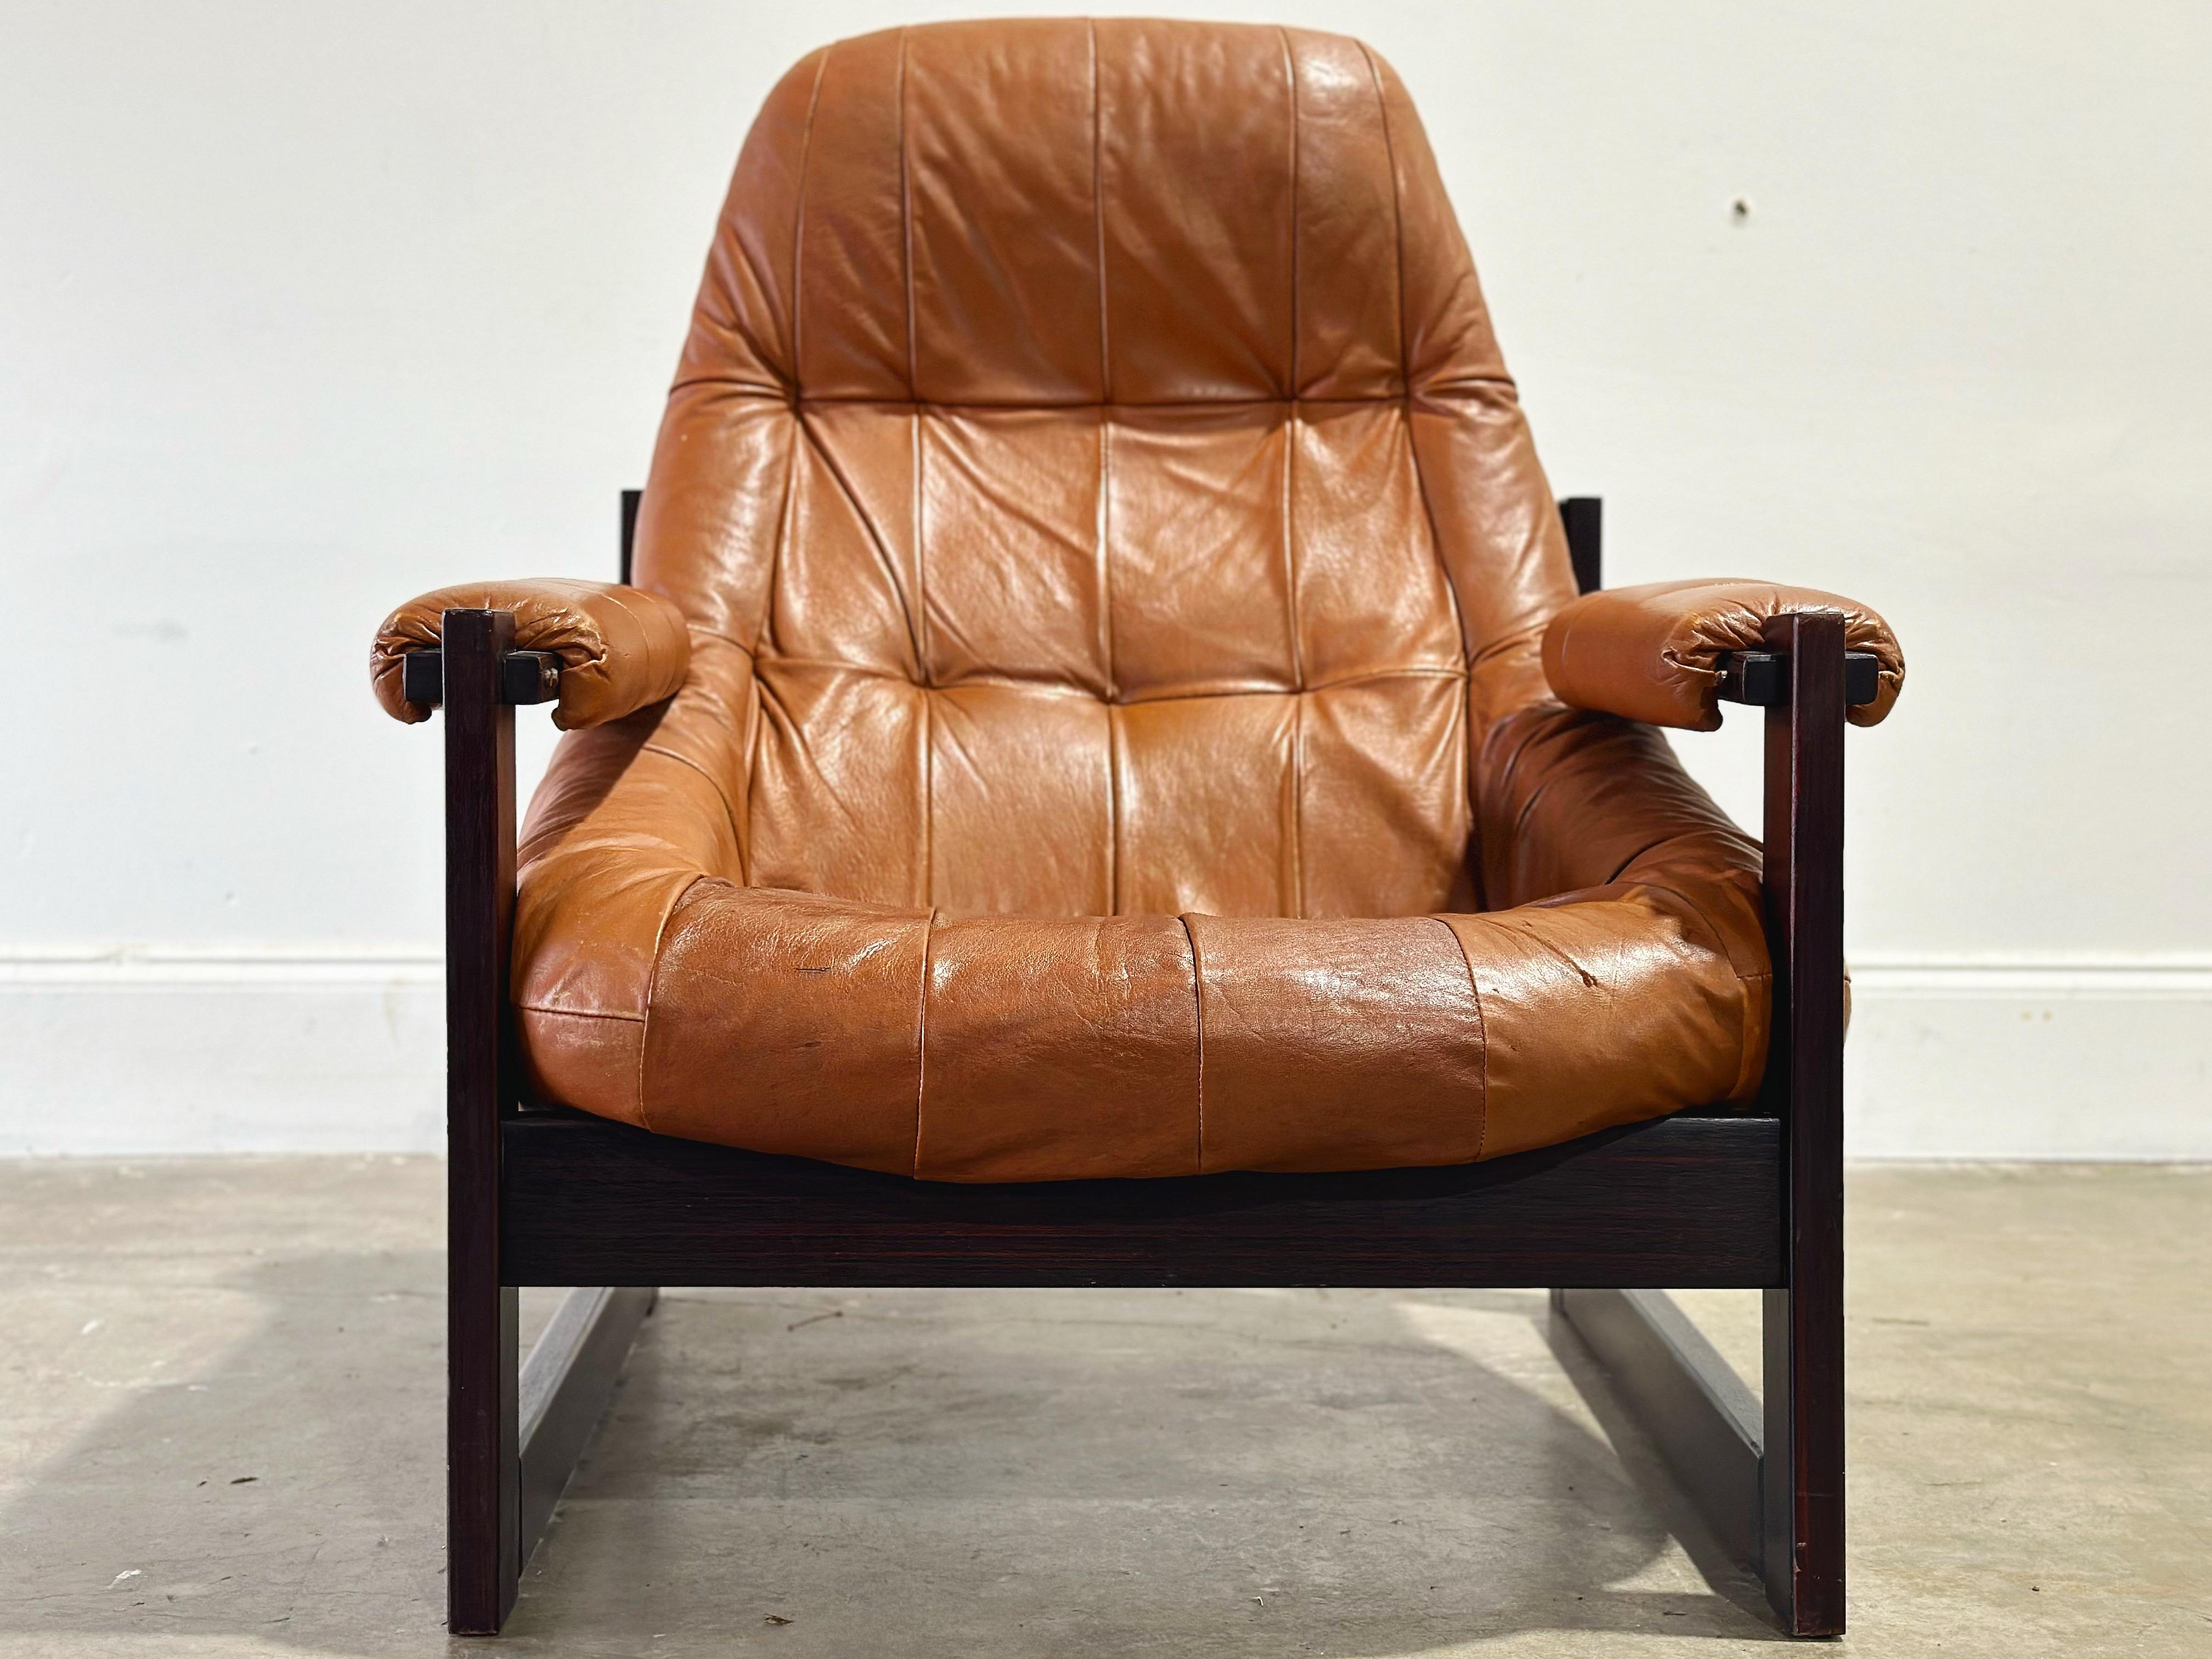 Percival Lafer Earth Chair, Cognac Leather + Jacaranda Wood Midcentury Lounge In Good Condition In Decatur, GA